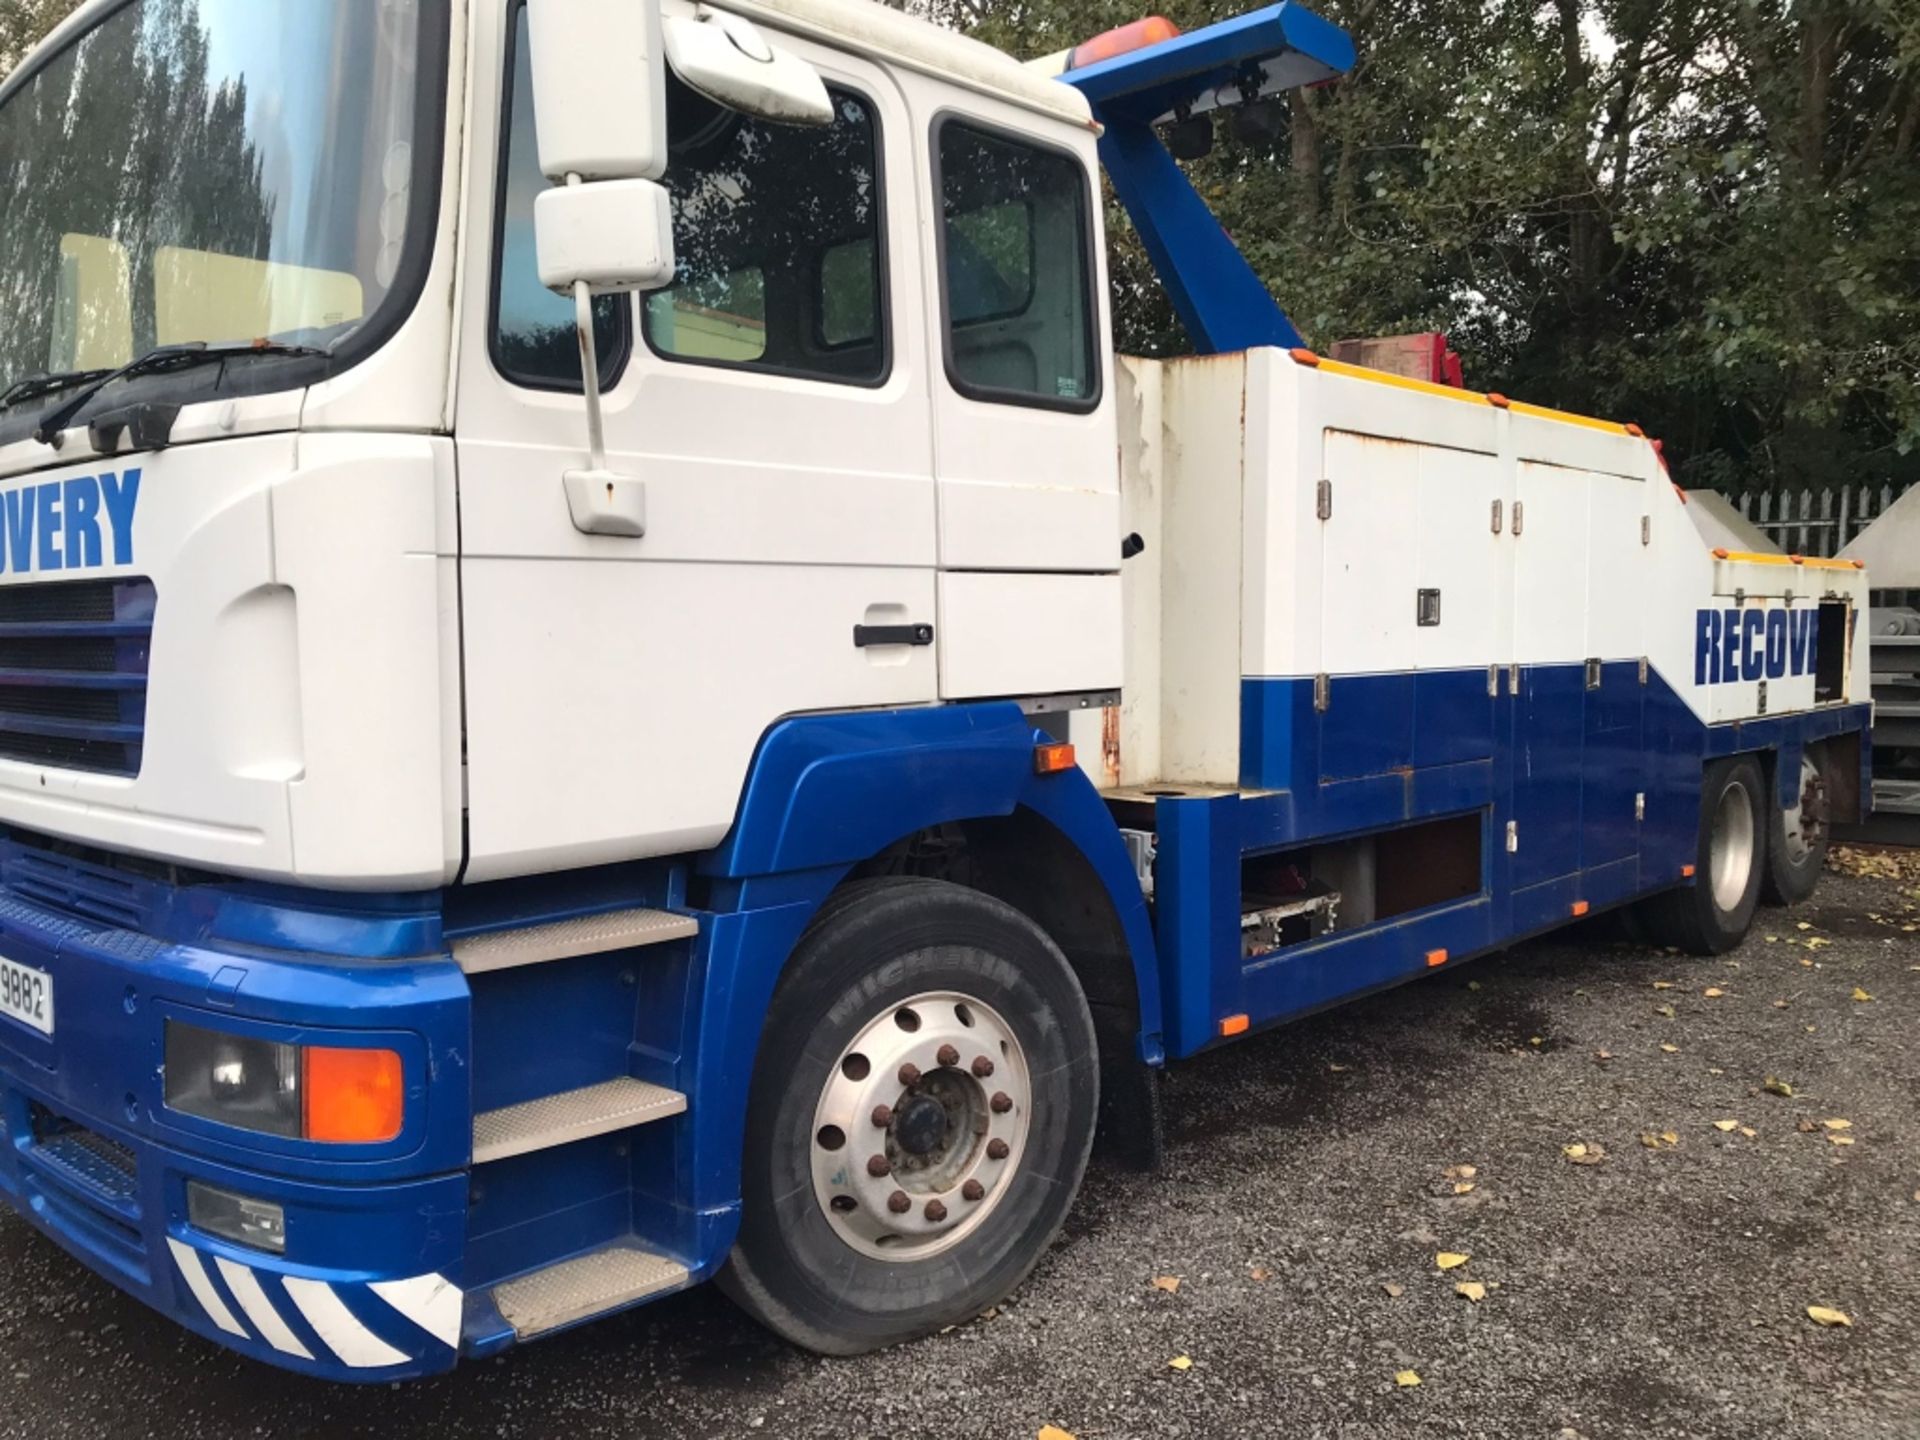 2001 6X2 ERF HEAVY HGV RECOVERY TRUCK - Image 2 of 14